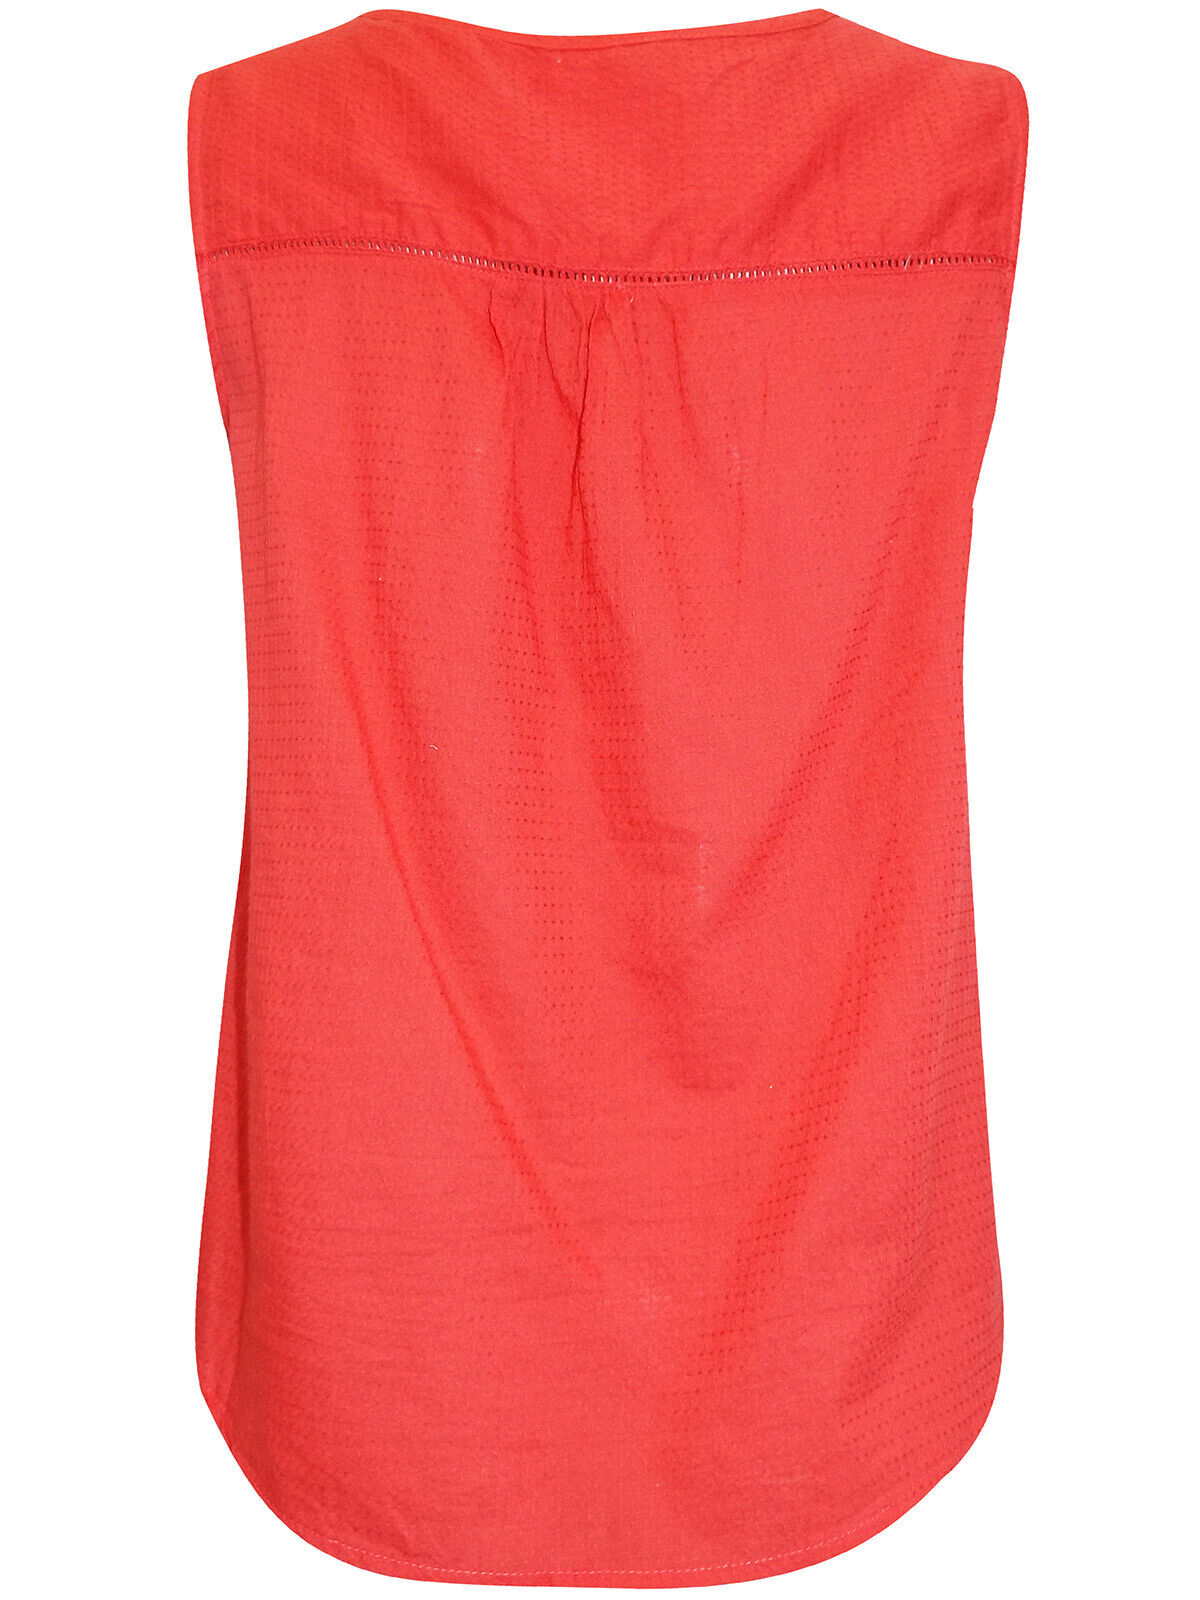 EX Mantaray Red Textured Cotton Top in Sizes 12, 14, 16, 18, 20, 22